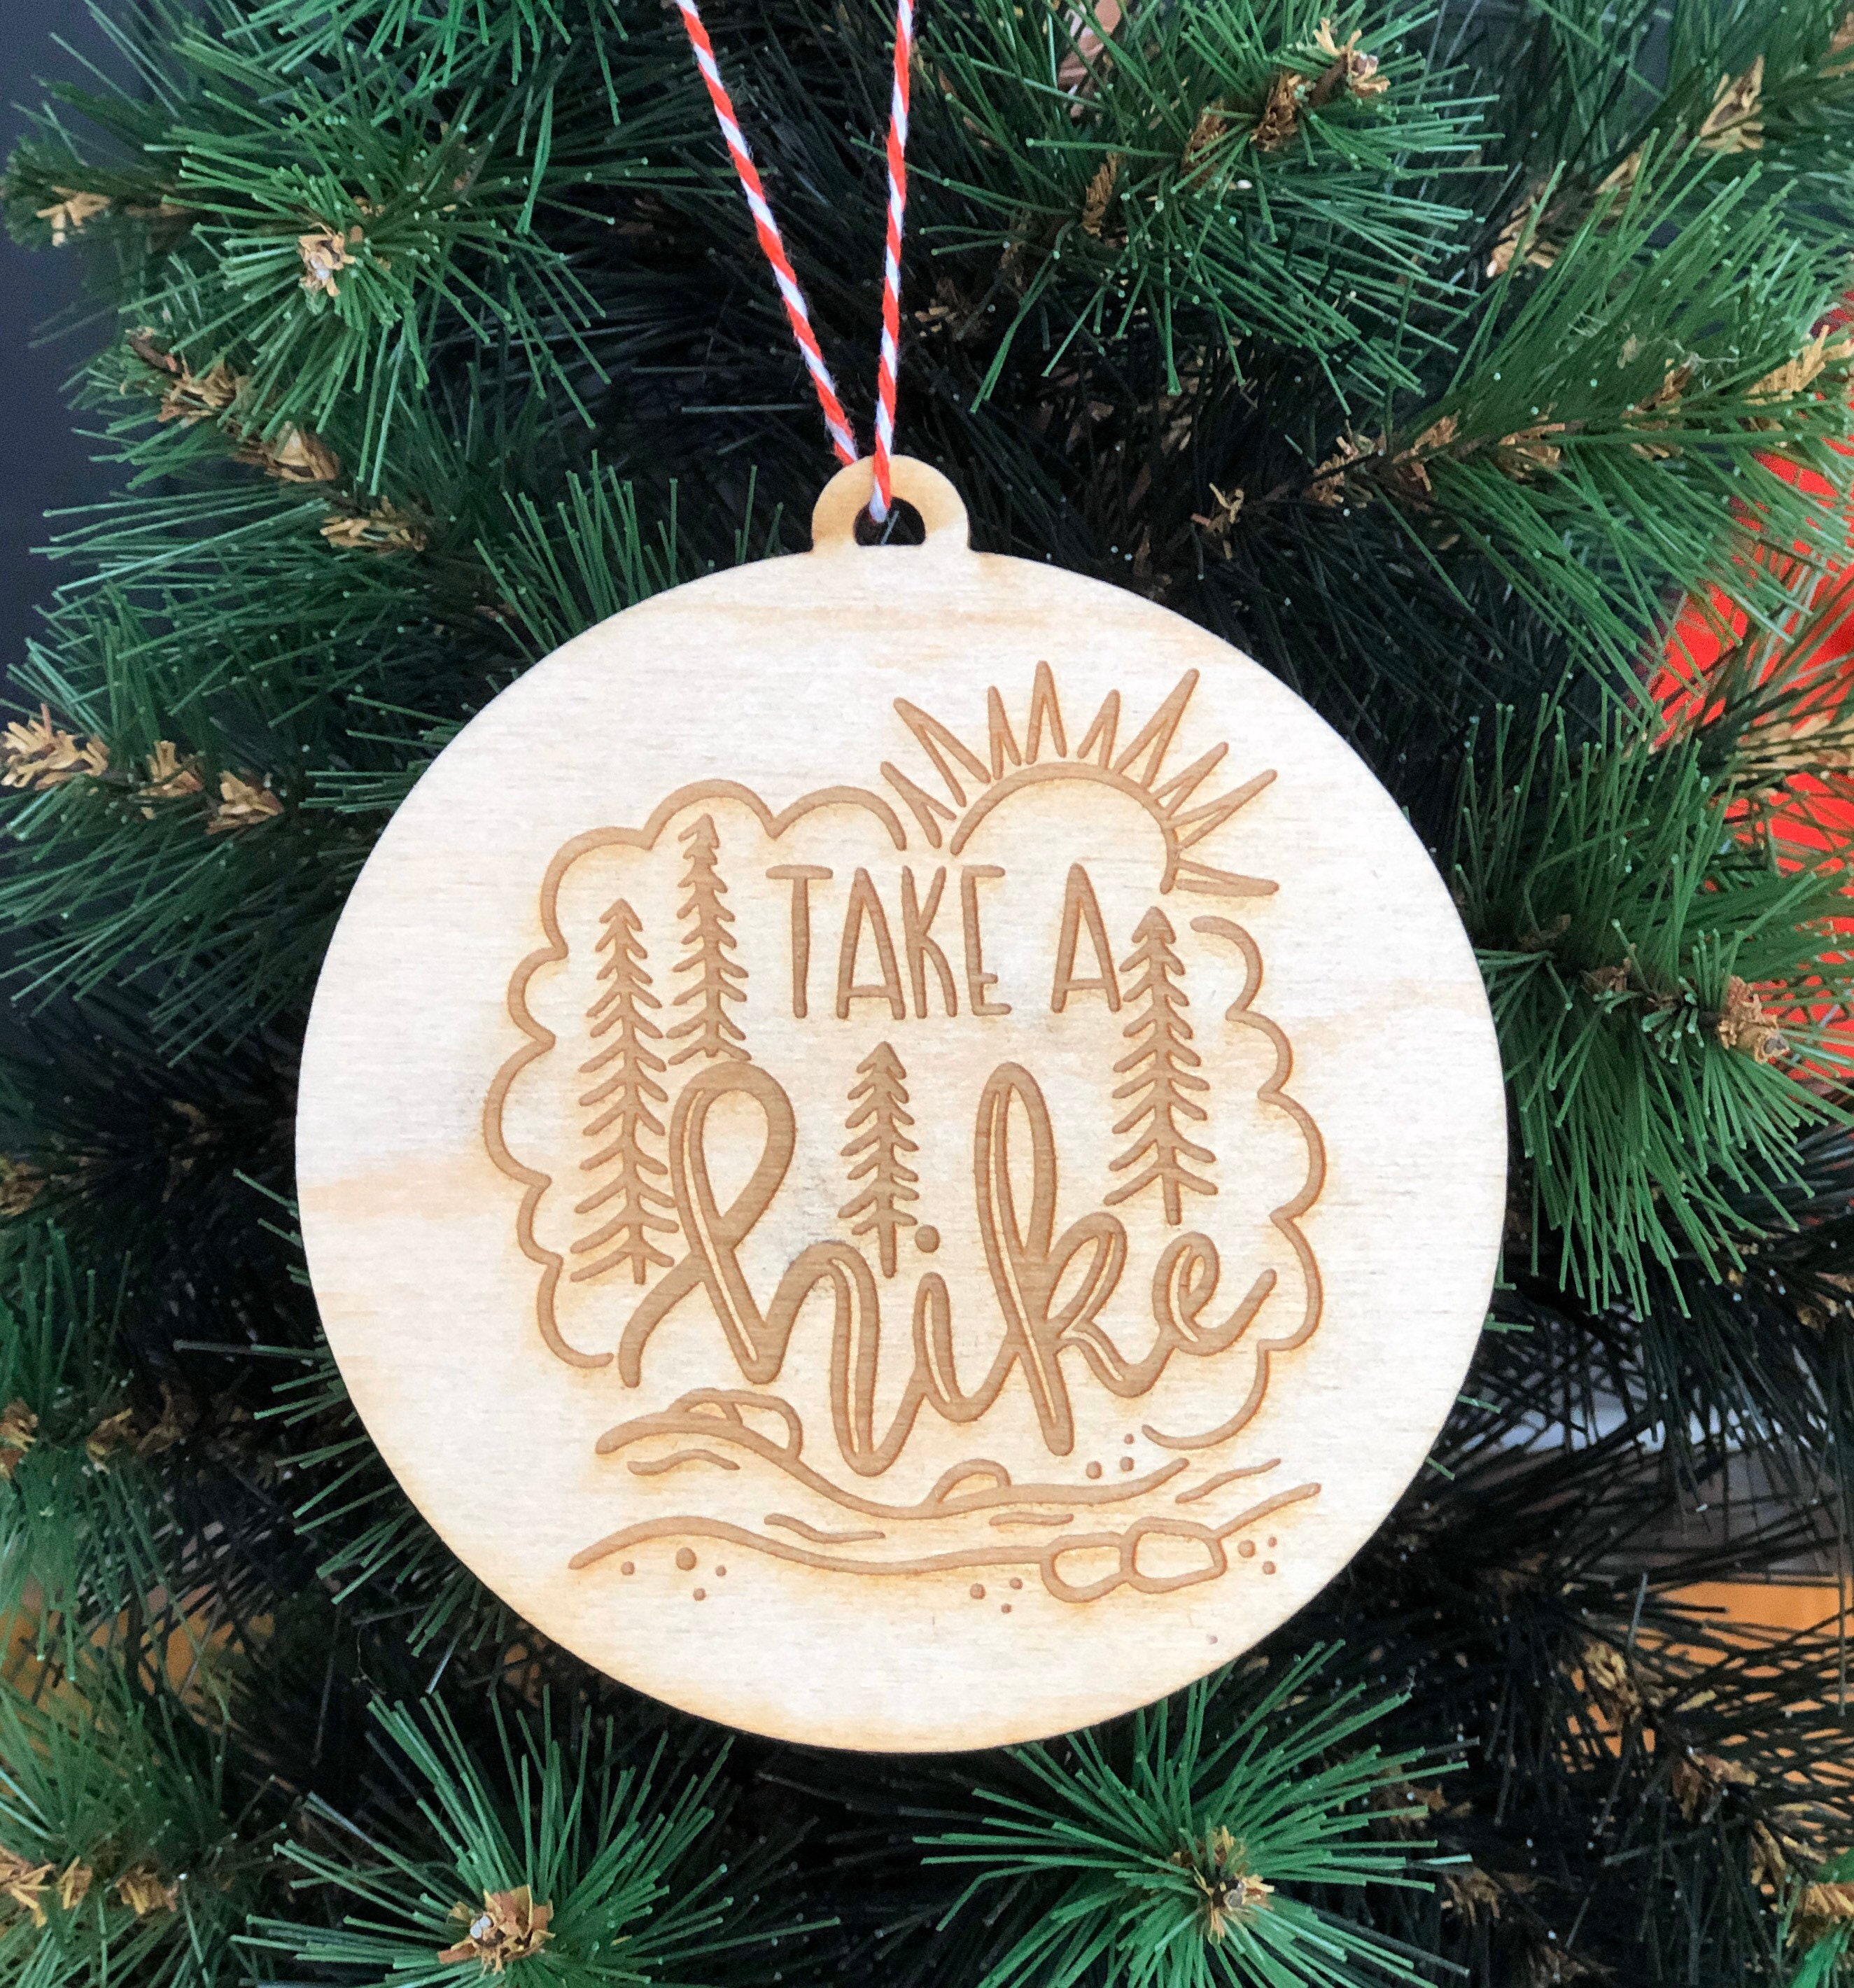 Mountains Backpacking Trails Free Personalization Hiking Personalized Christmas Ornaments Exploring Take a Hike Bear